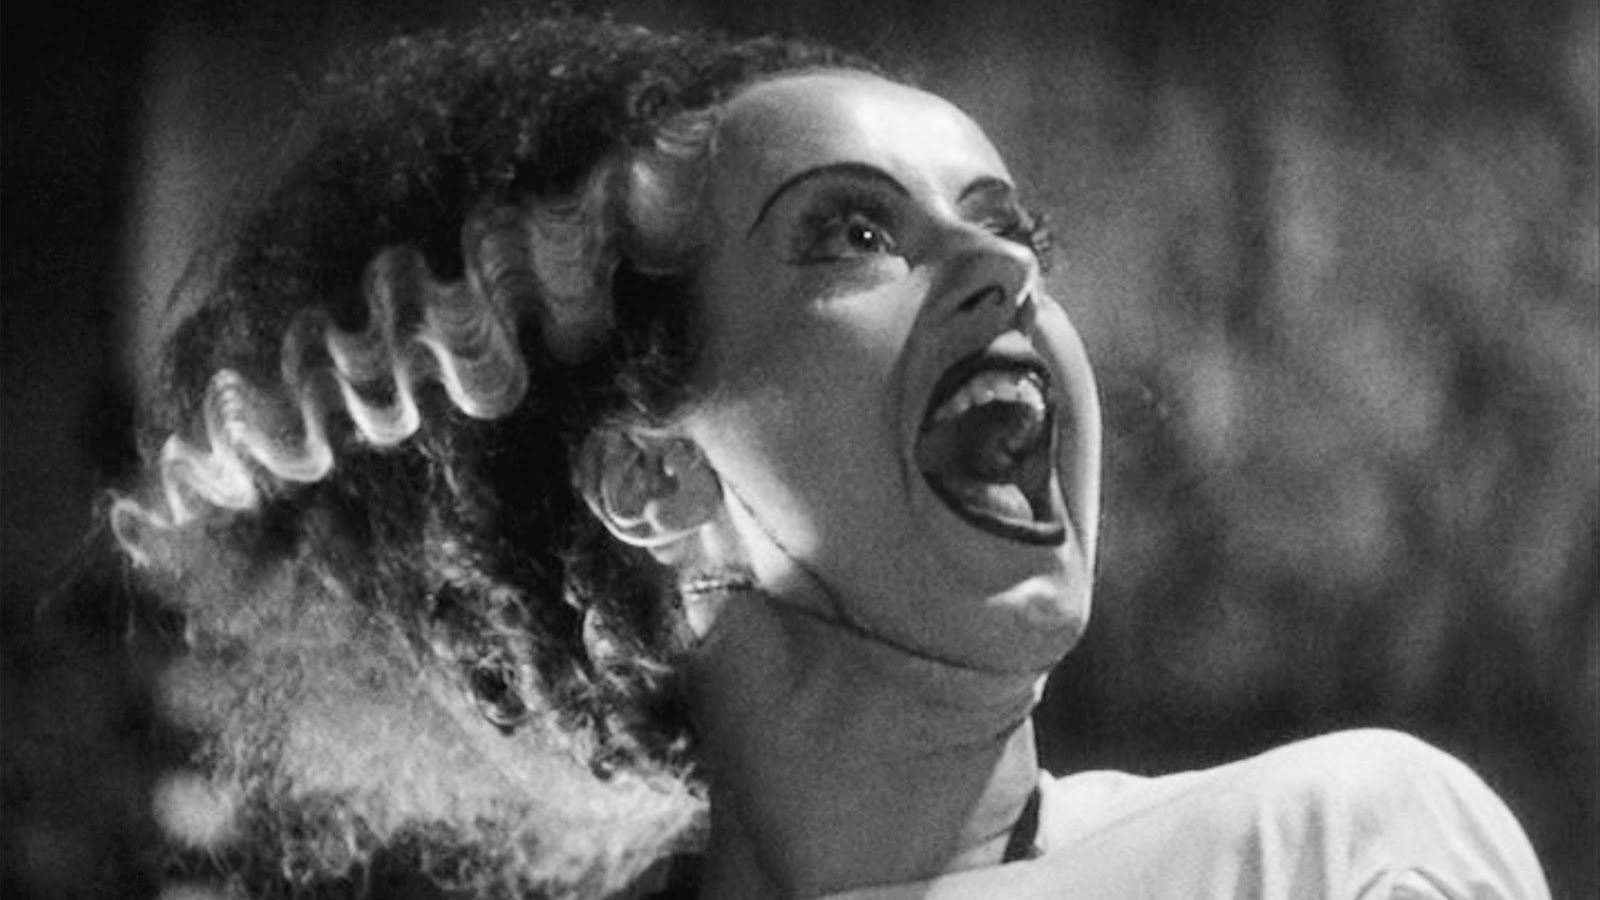 Oct 31 Spooky Season and the Truth of Bride of Frankenstein.